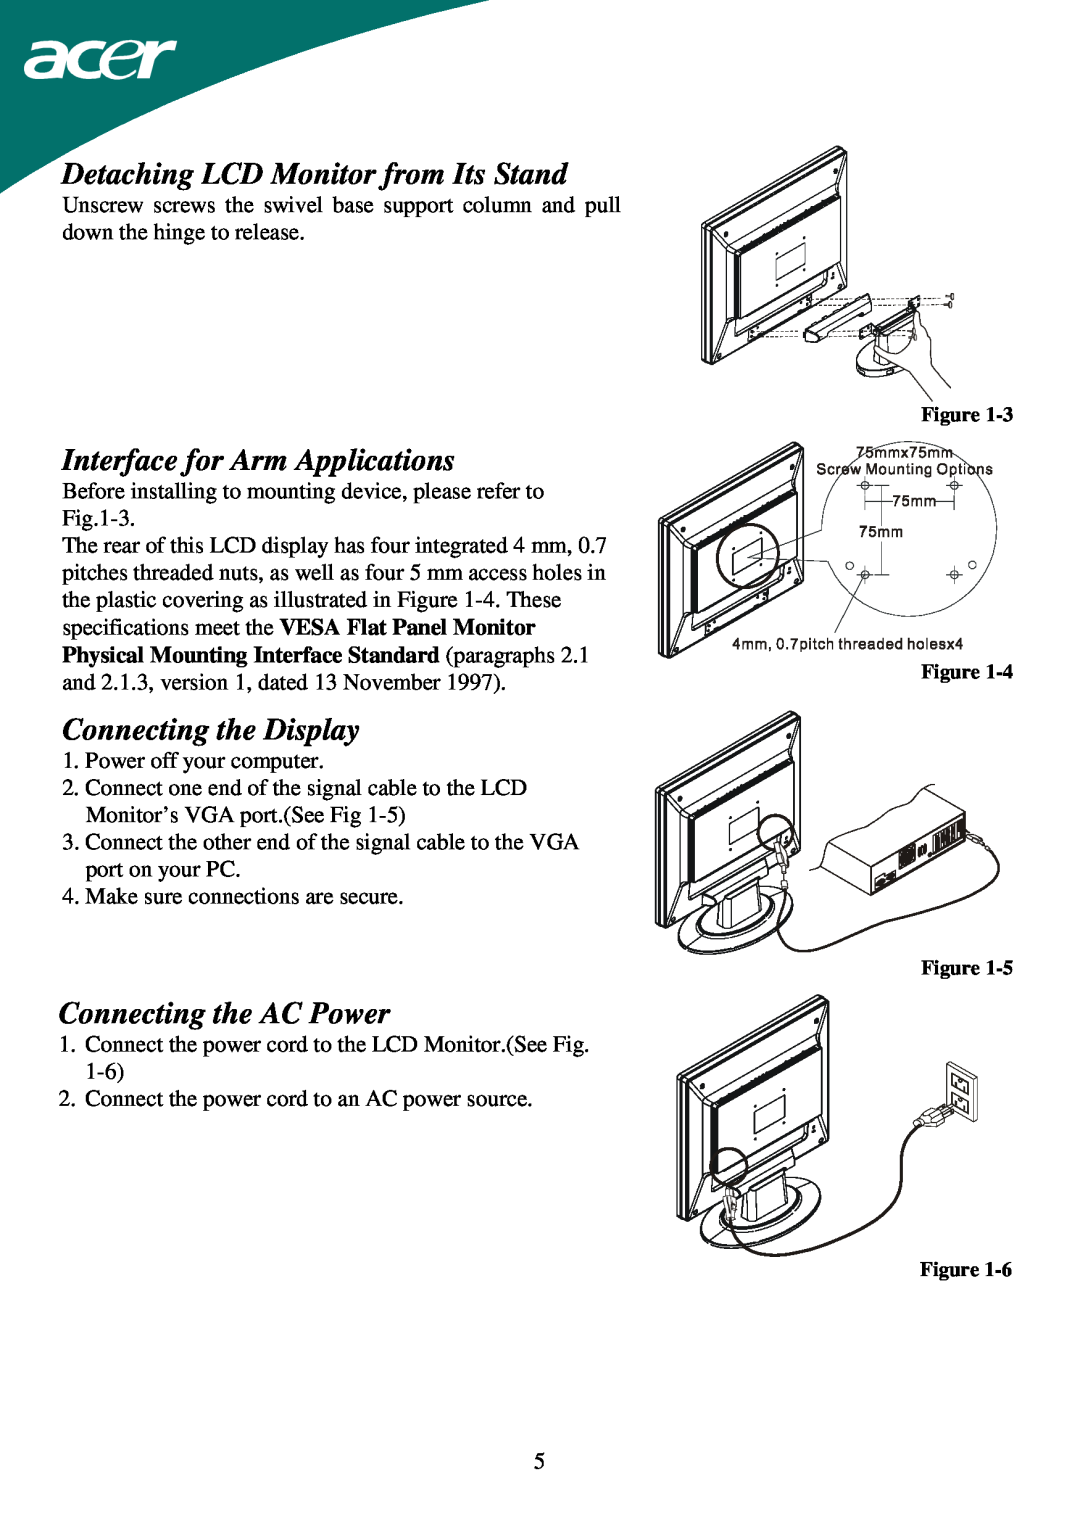 Acer AL1715 Detaching LCD Monitor from Its Stand, Interface for Arm Applications, Connecting the Display 